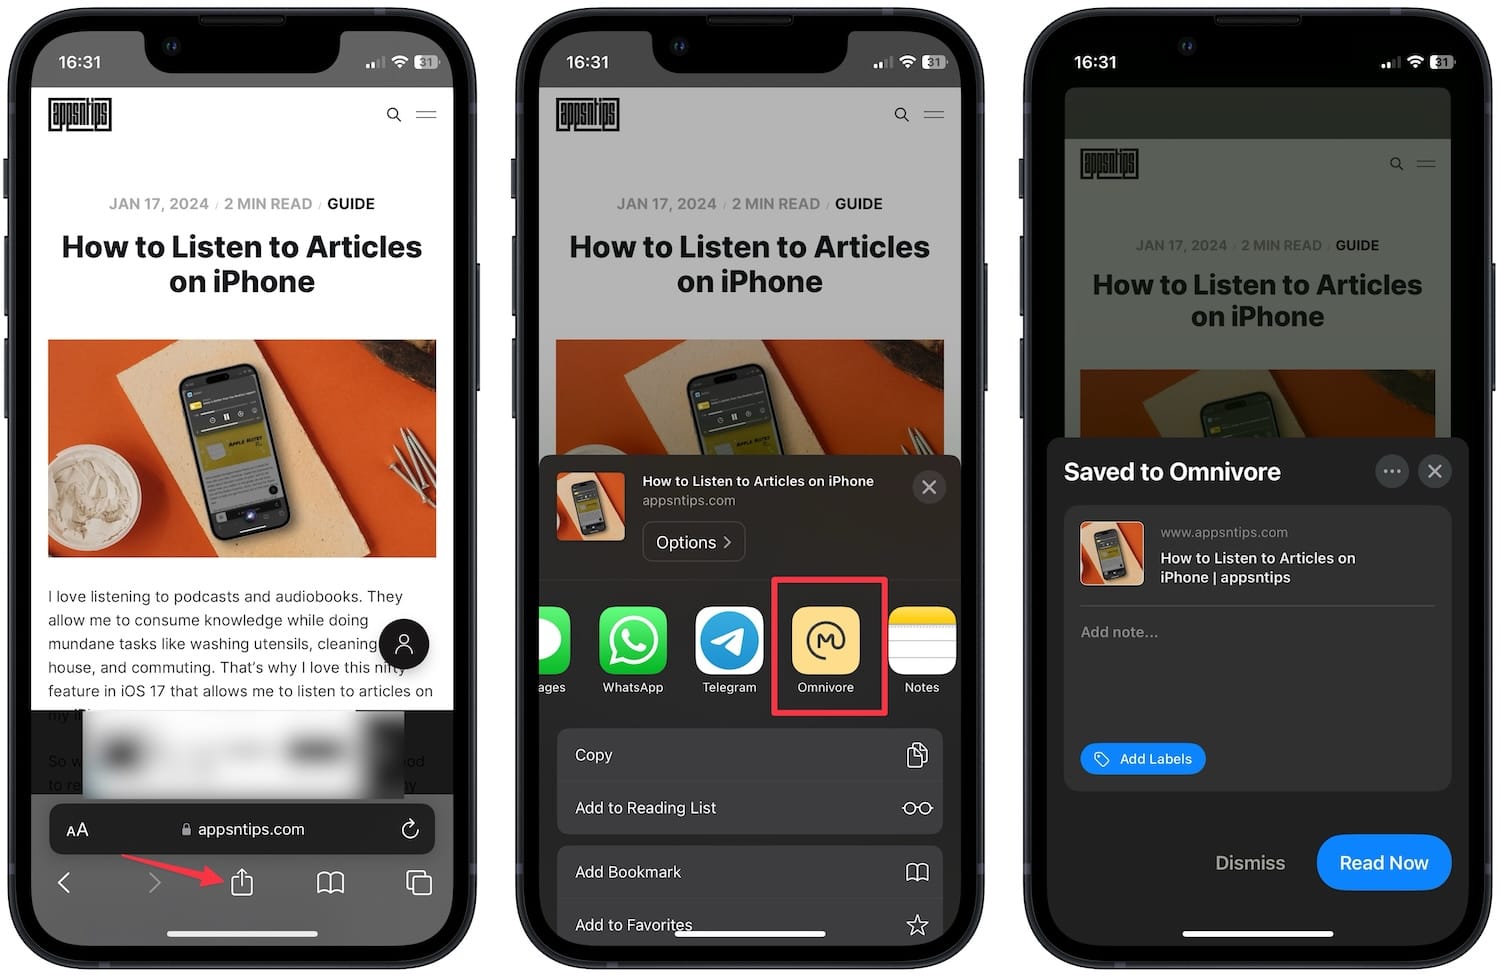 Saving articles to Omnivore on Mobile